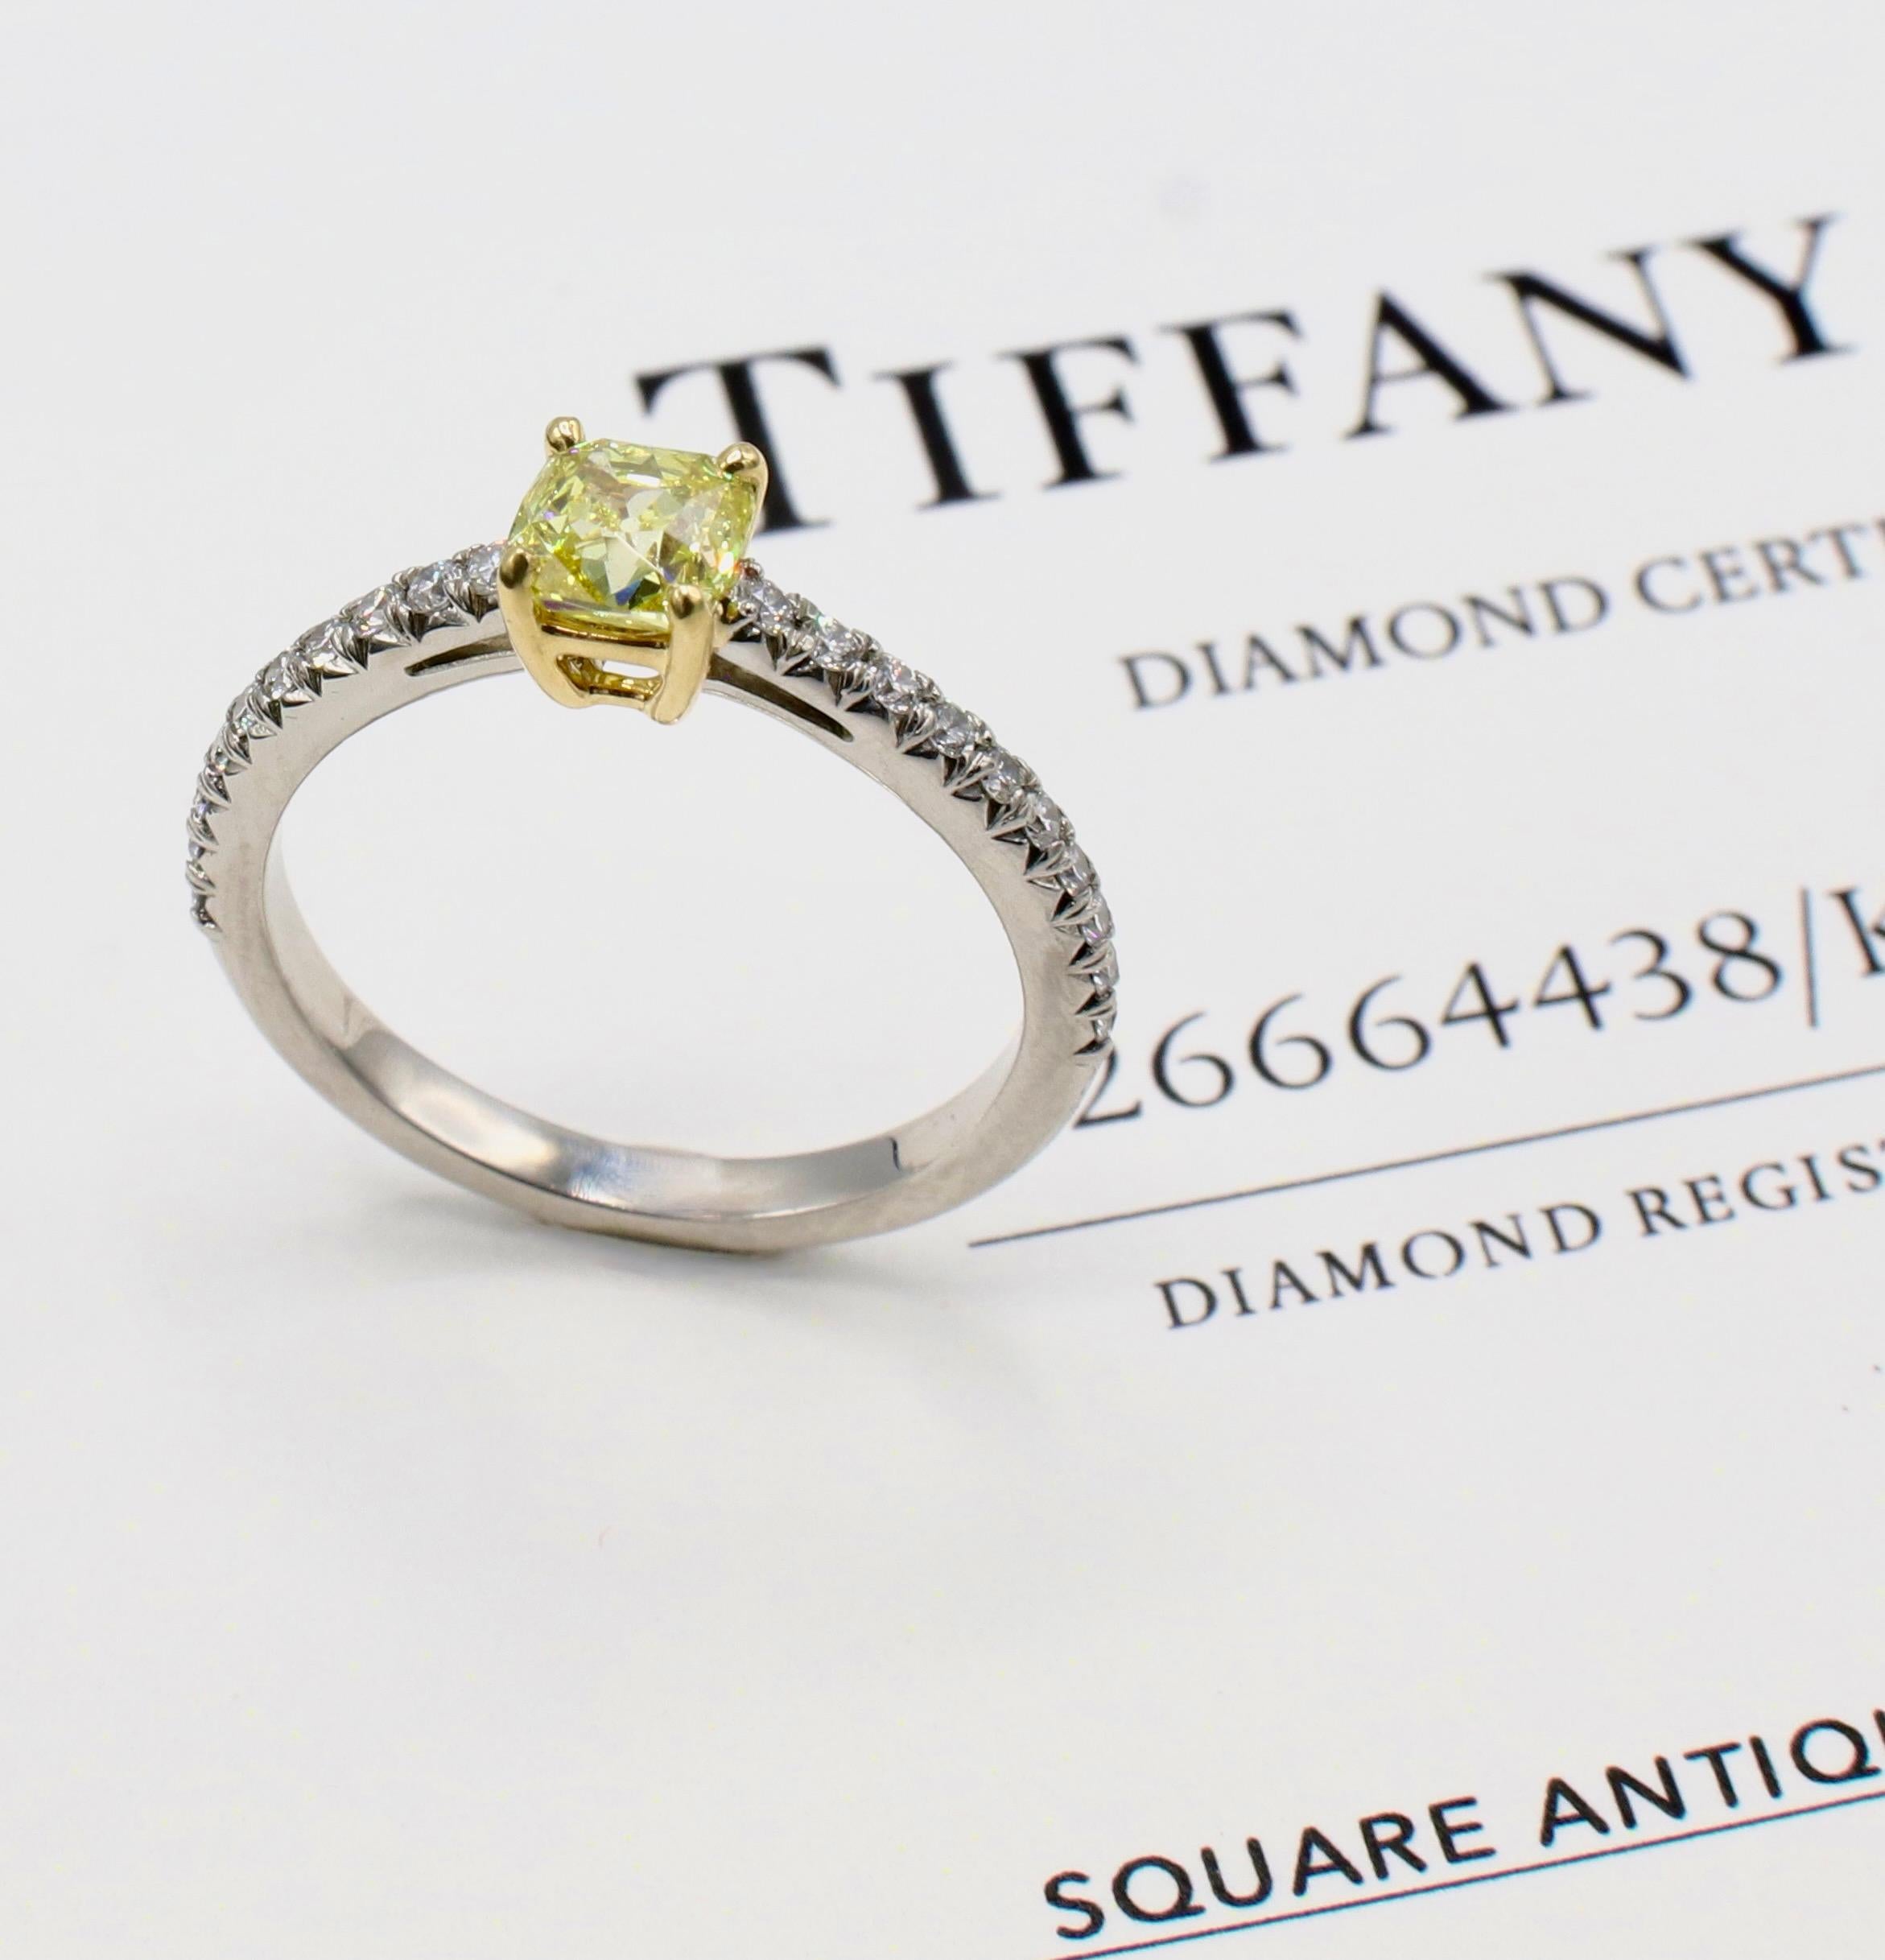 Tiffany & Co. 0.59 Carat Fancy Intense Yellow Square Antique Natural Diamond Engagement Ring
Metal: Platinum & 18K yellow gold
Diamond: 0.59 carat antique cushion fancy intense yellow natural diamond VS1
Accent diamonds: Approx. .20 CTW F-G VS round